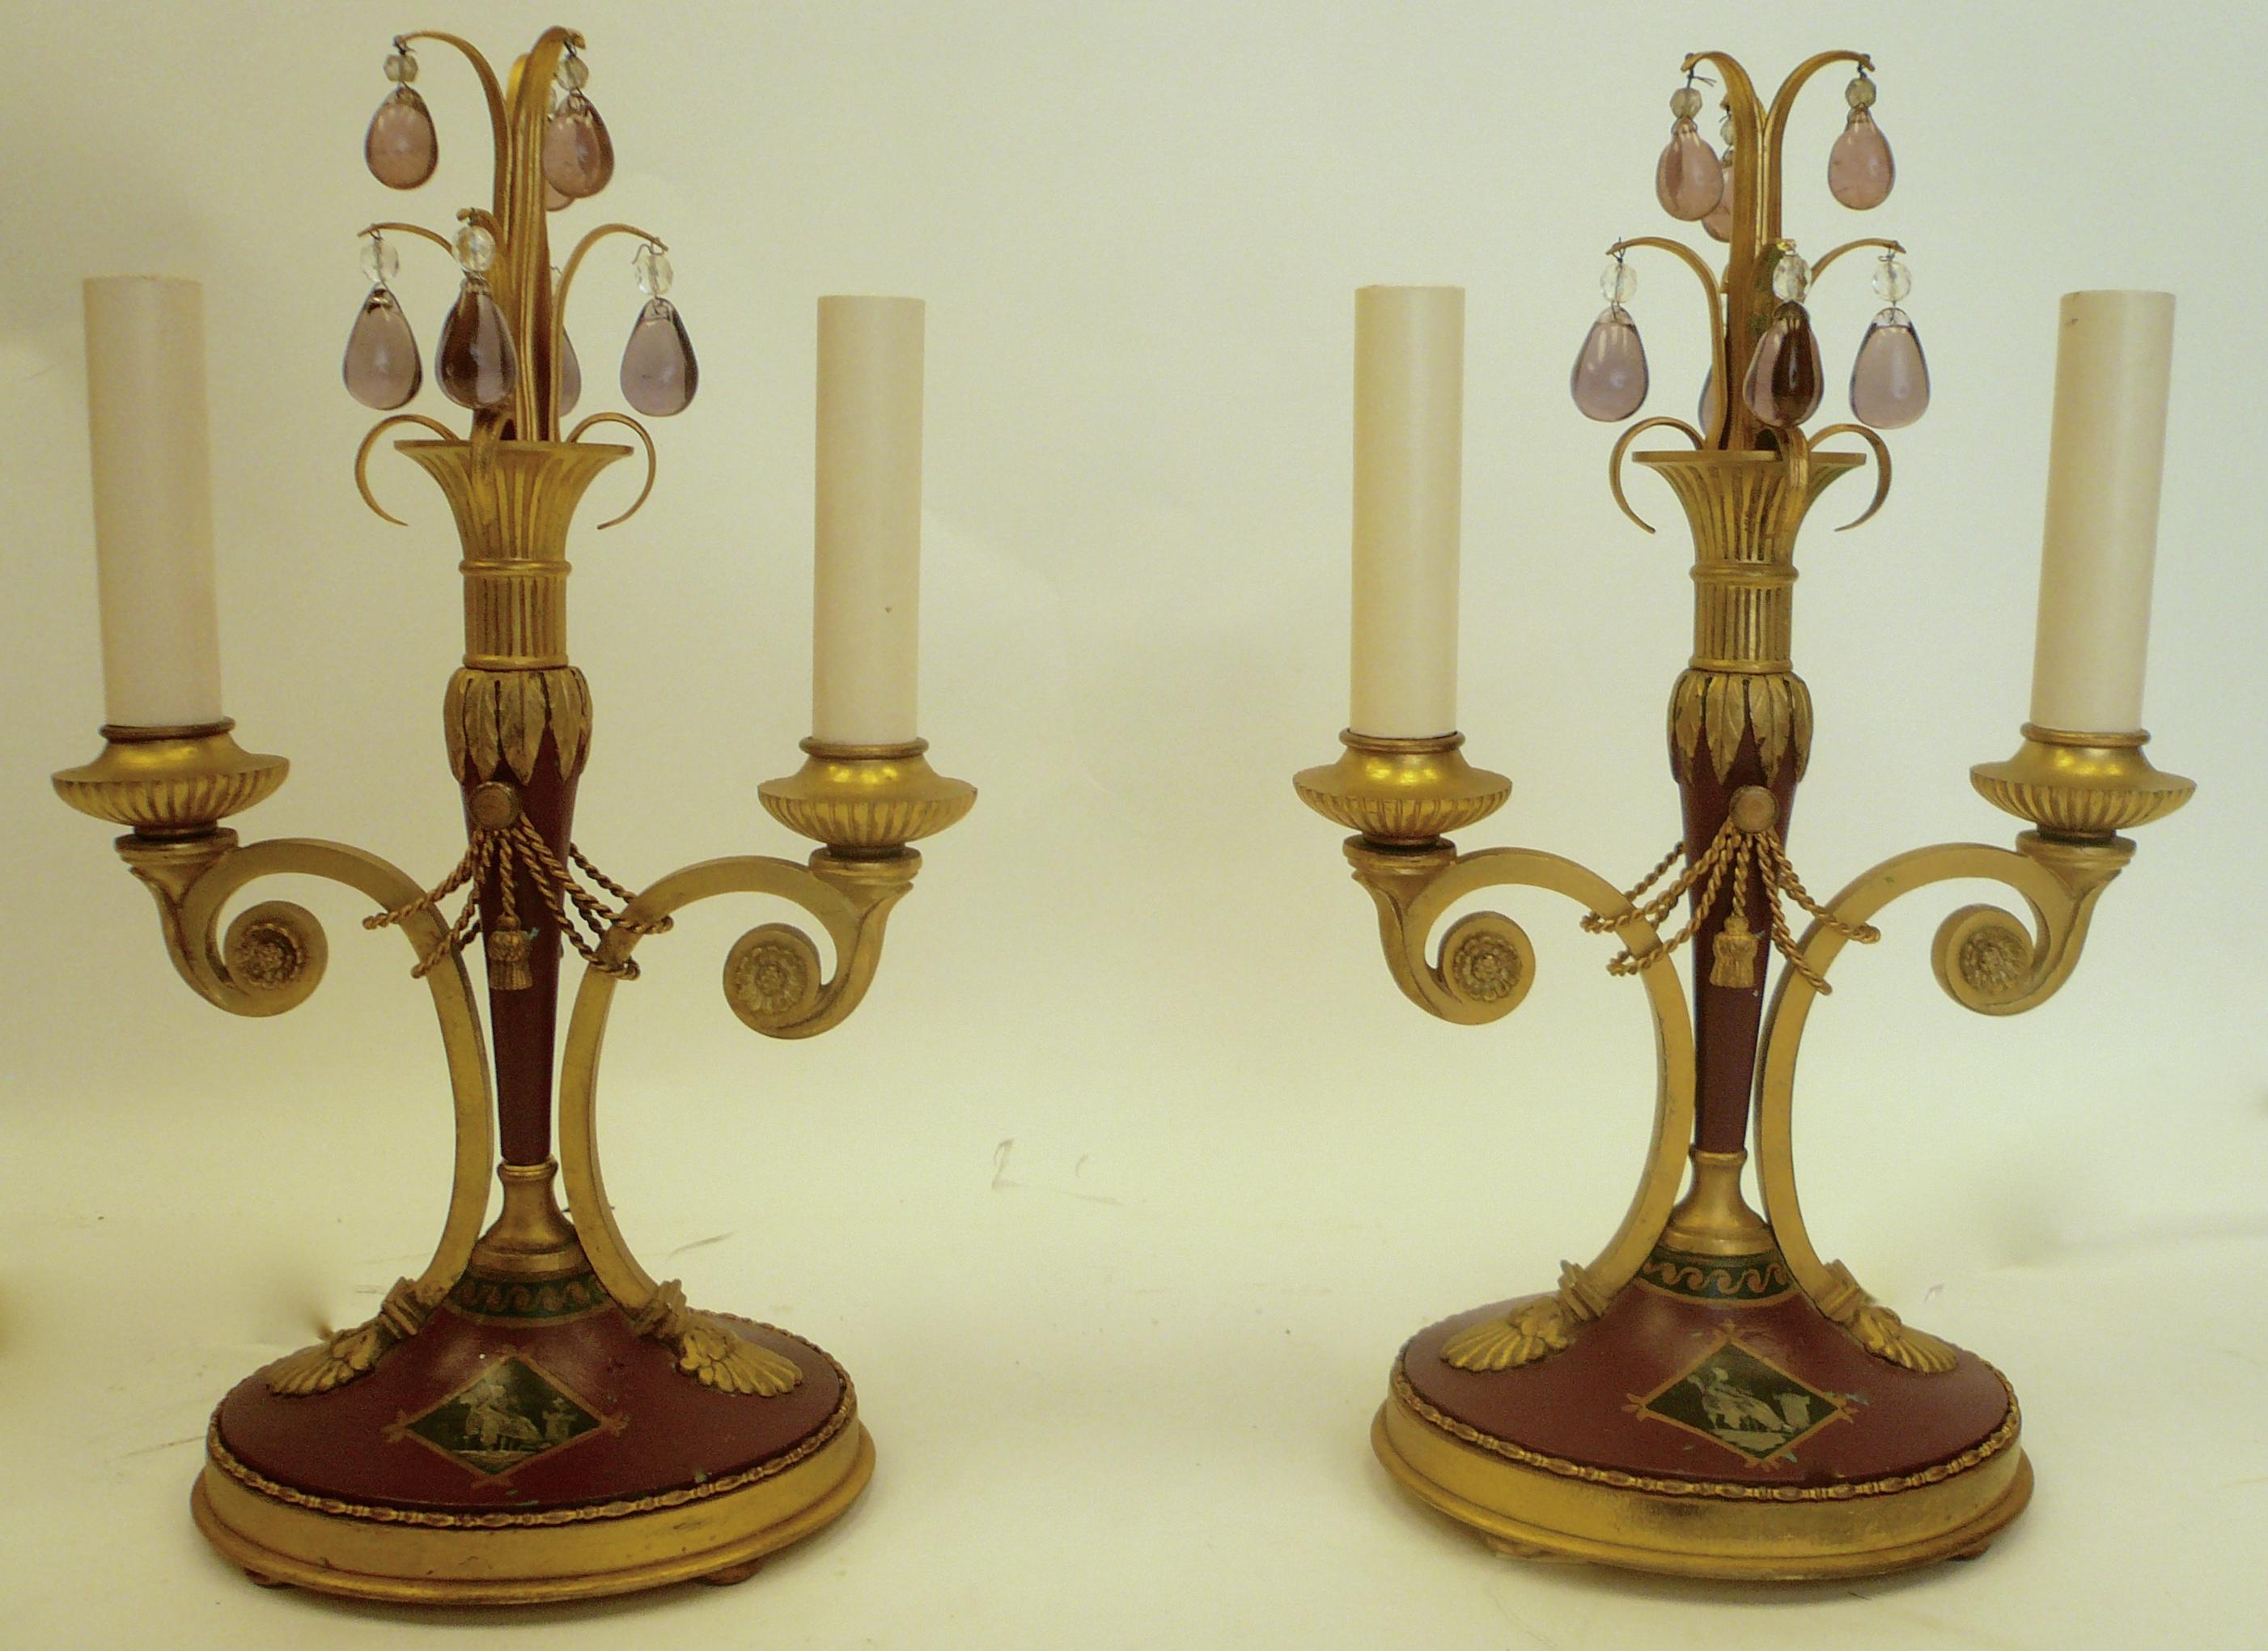 This handsome pair of lamps feature Classical motifs including swags, tassels, and acanthus leaves. The gilt bronze is accented by Wedgwood jasperware style hand painted designs, and trimmed with pale amethyst crystal drops.